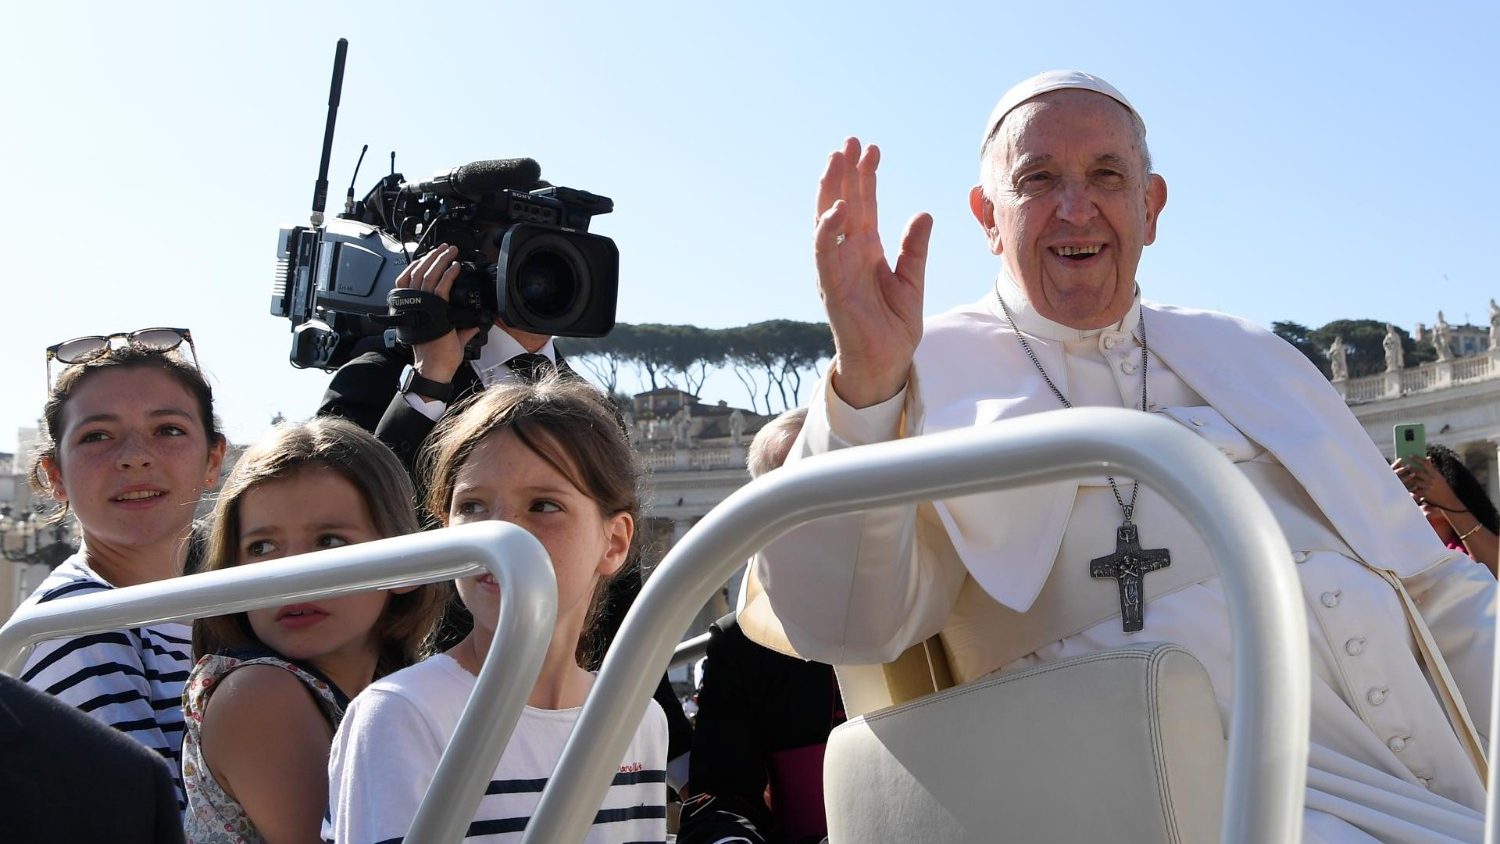 Pope’s audience: Older people can inspire a more just and humane society